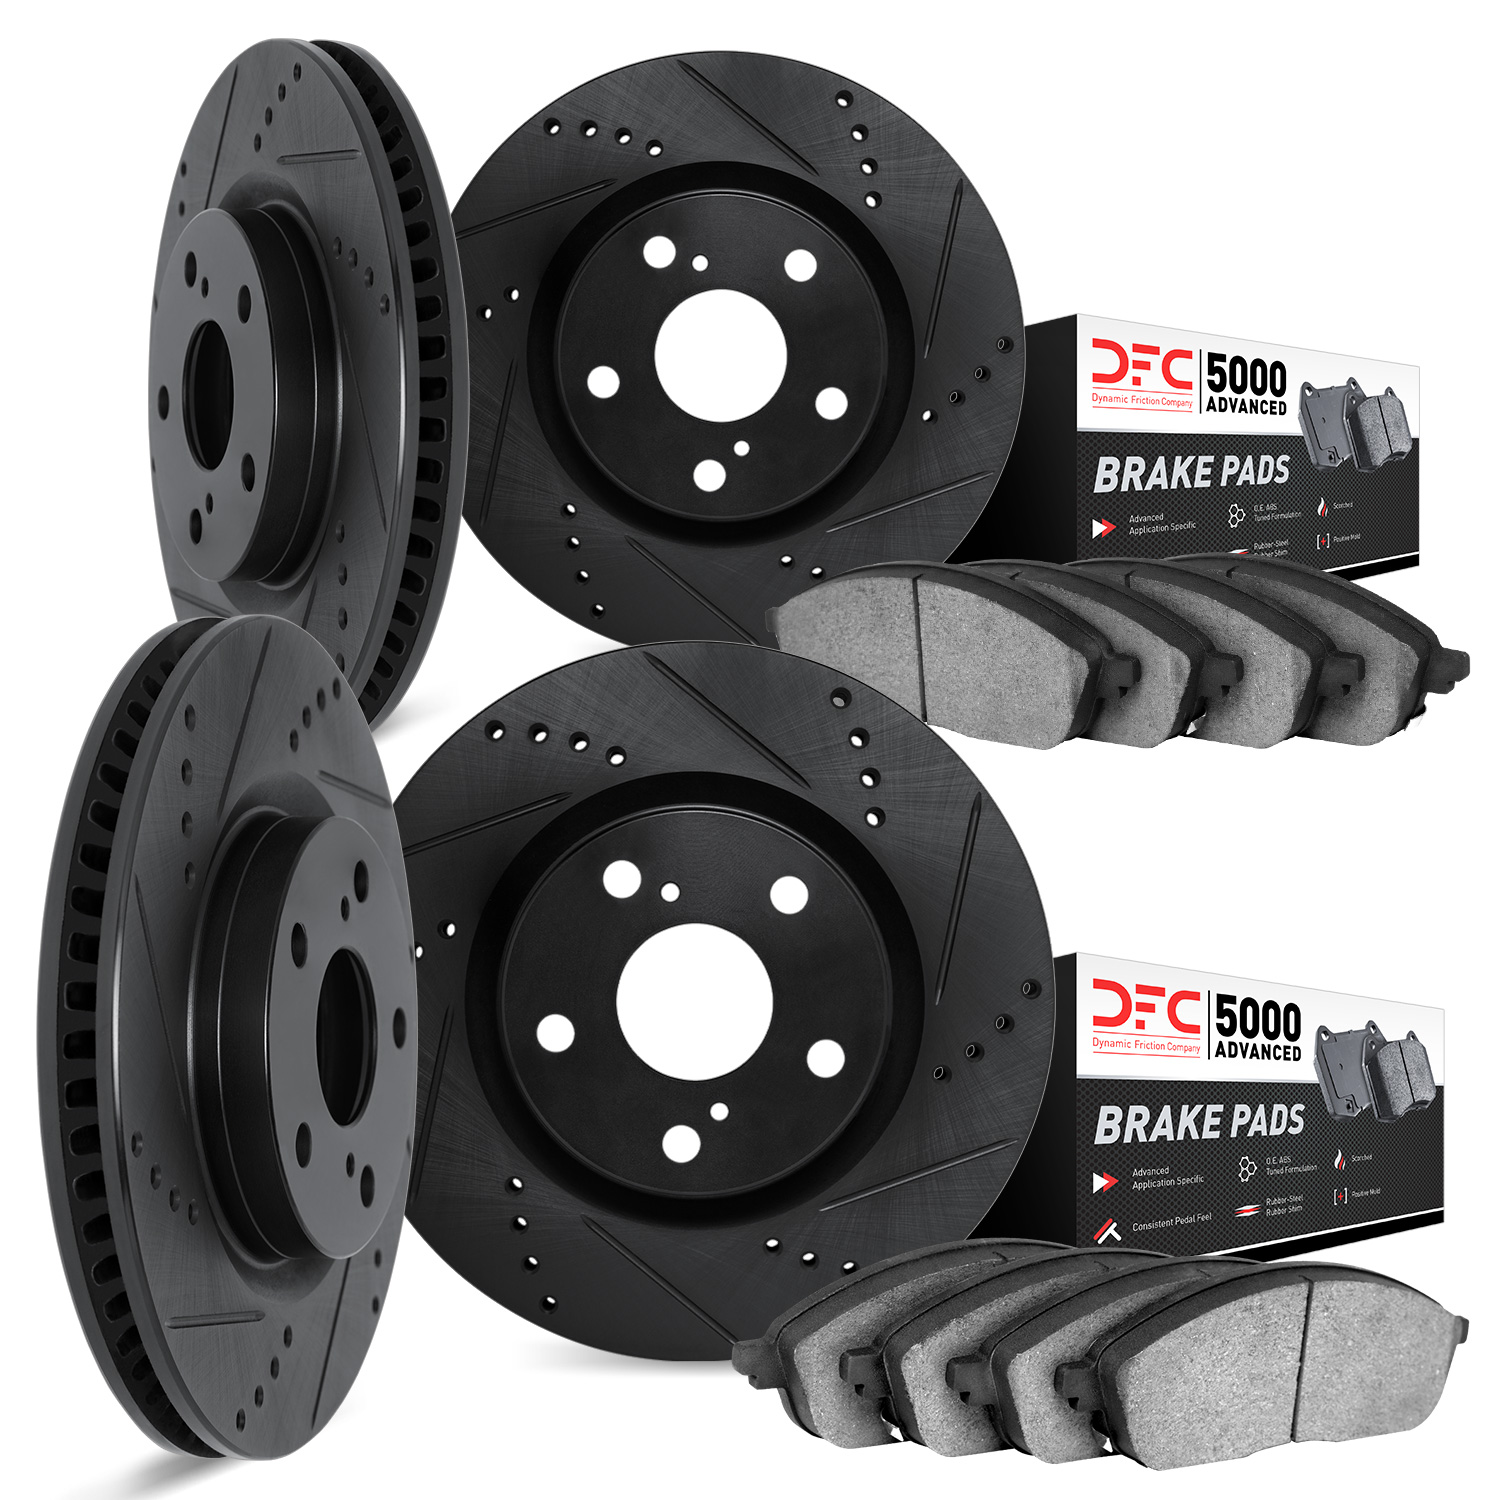 8504-48004 Drilled/Slotted Brake Rotors w/5000 Advanced Brake Pads Kit [Black], 1997-2005 GM, Position: Front and Rear